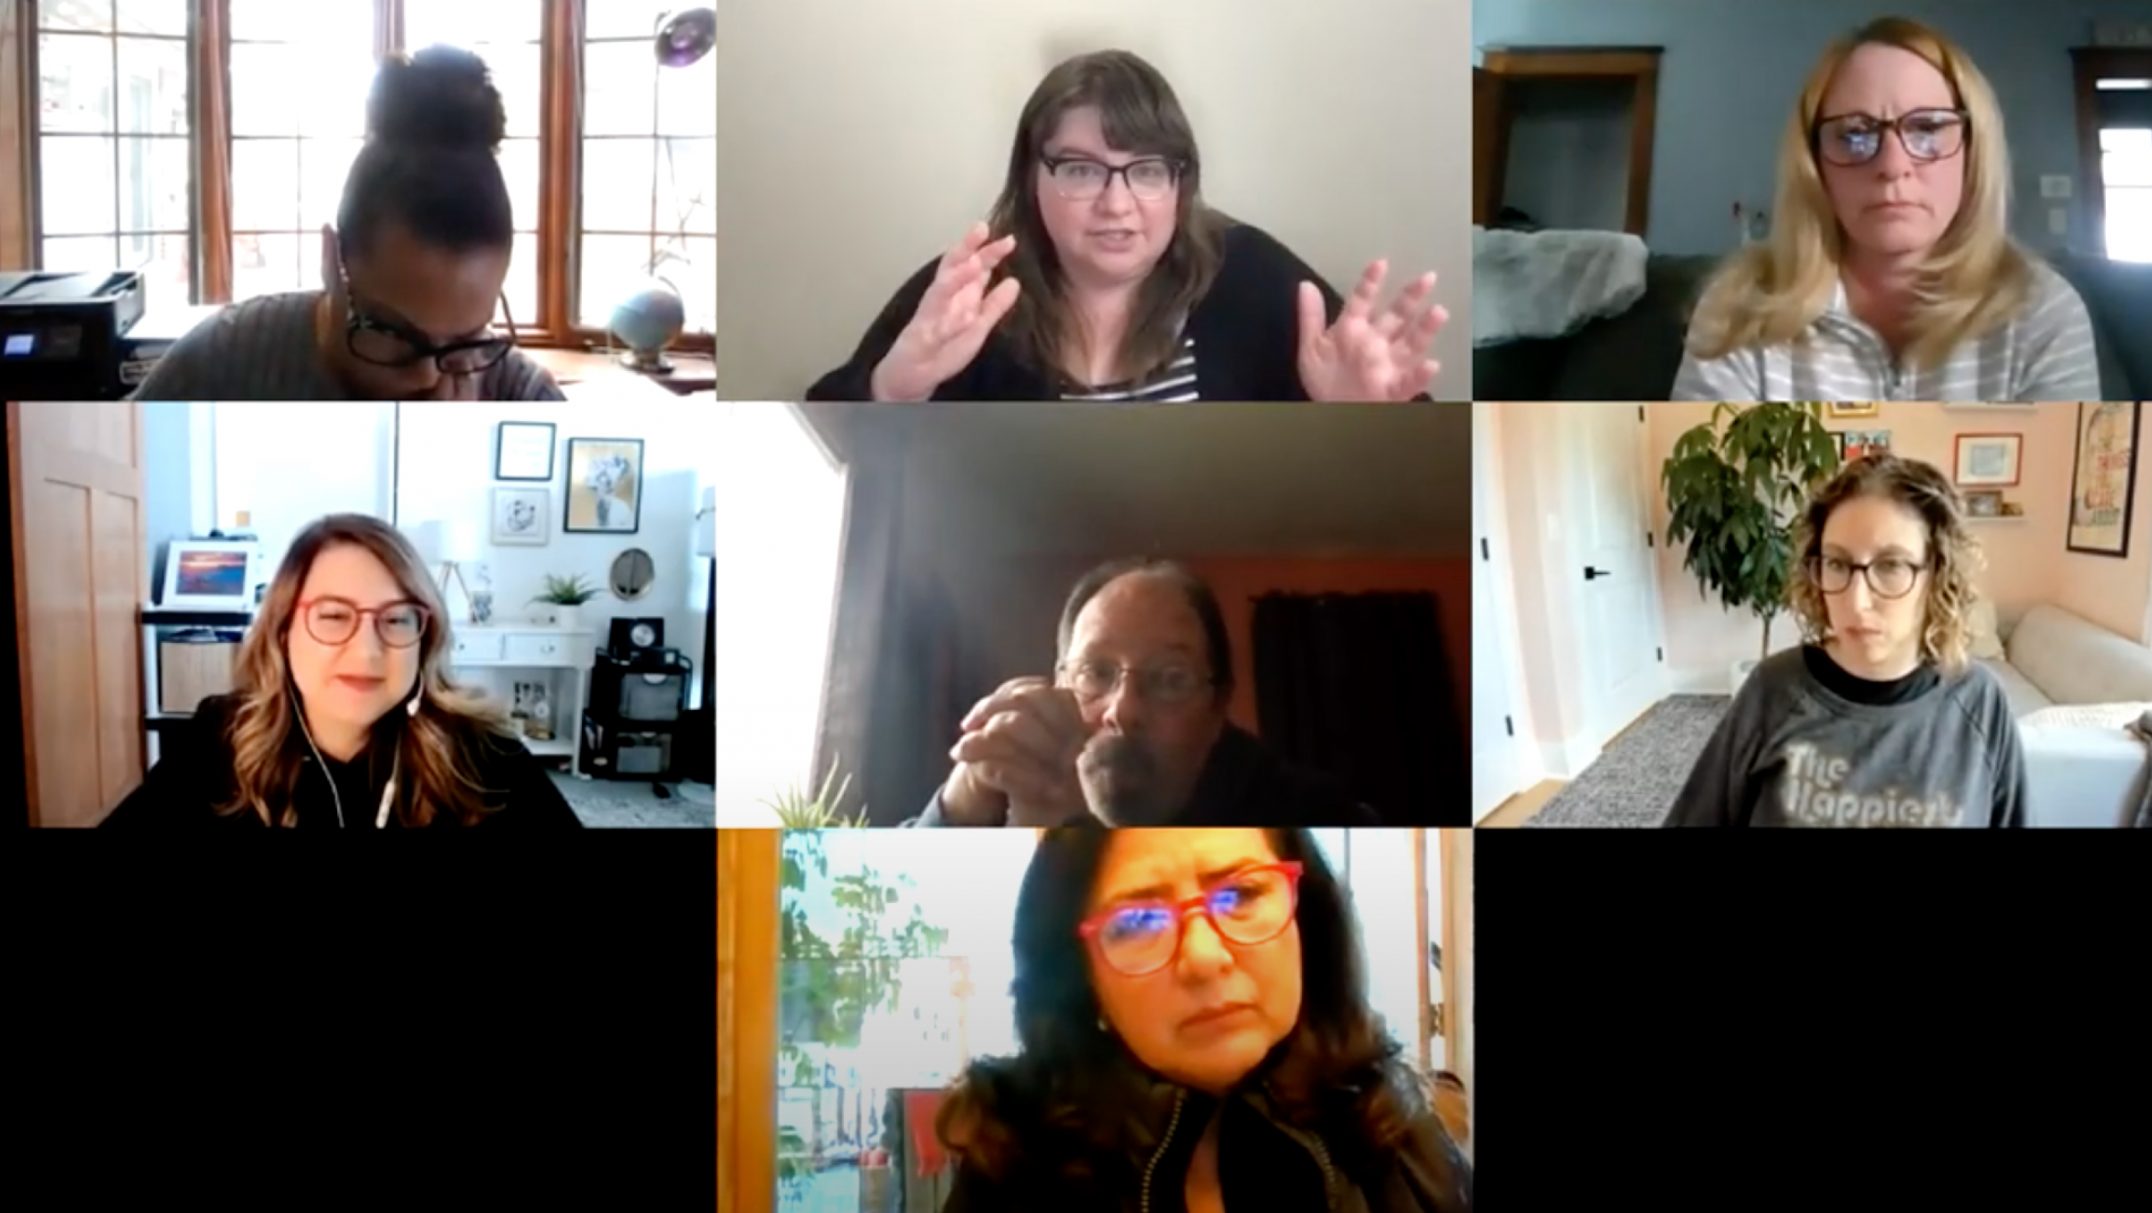 Zoom screen (video chat) grid of nine people with different backgrounds. The top row, center person is gesturing as though they are talking.